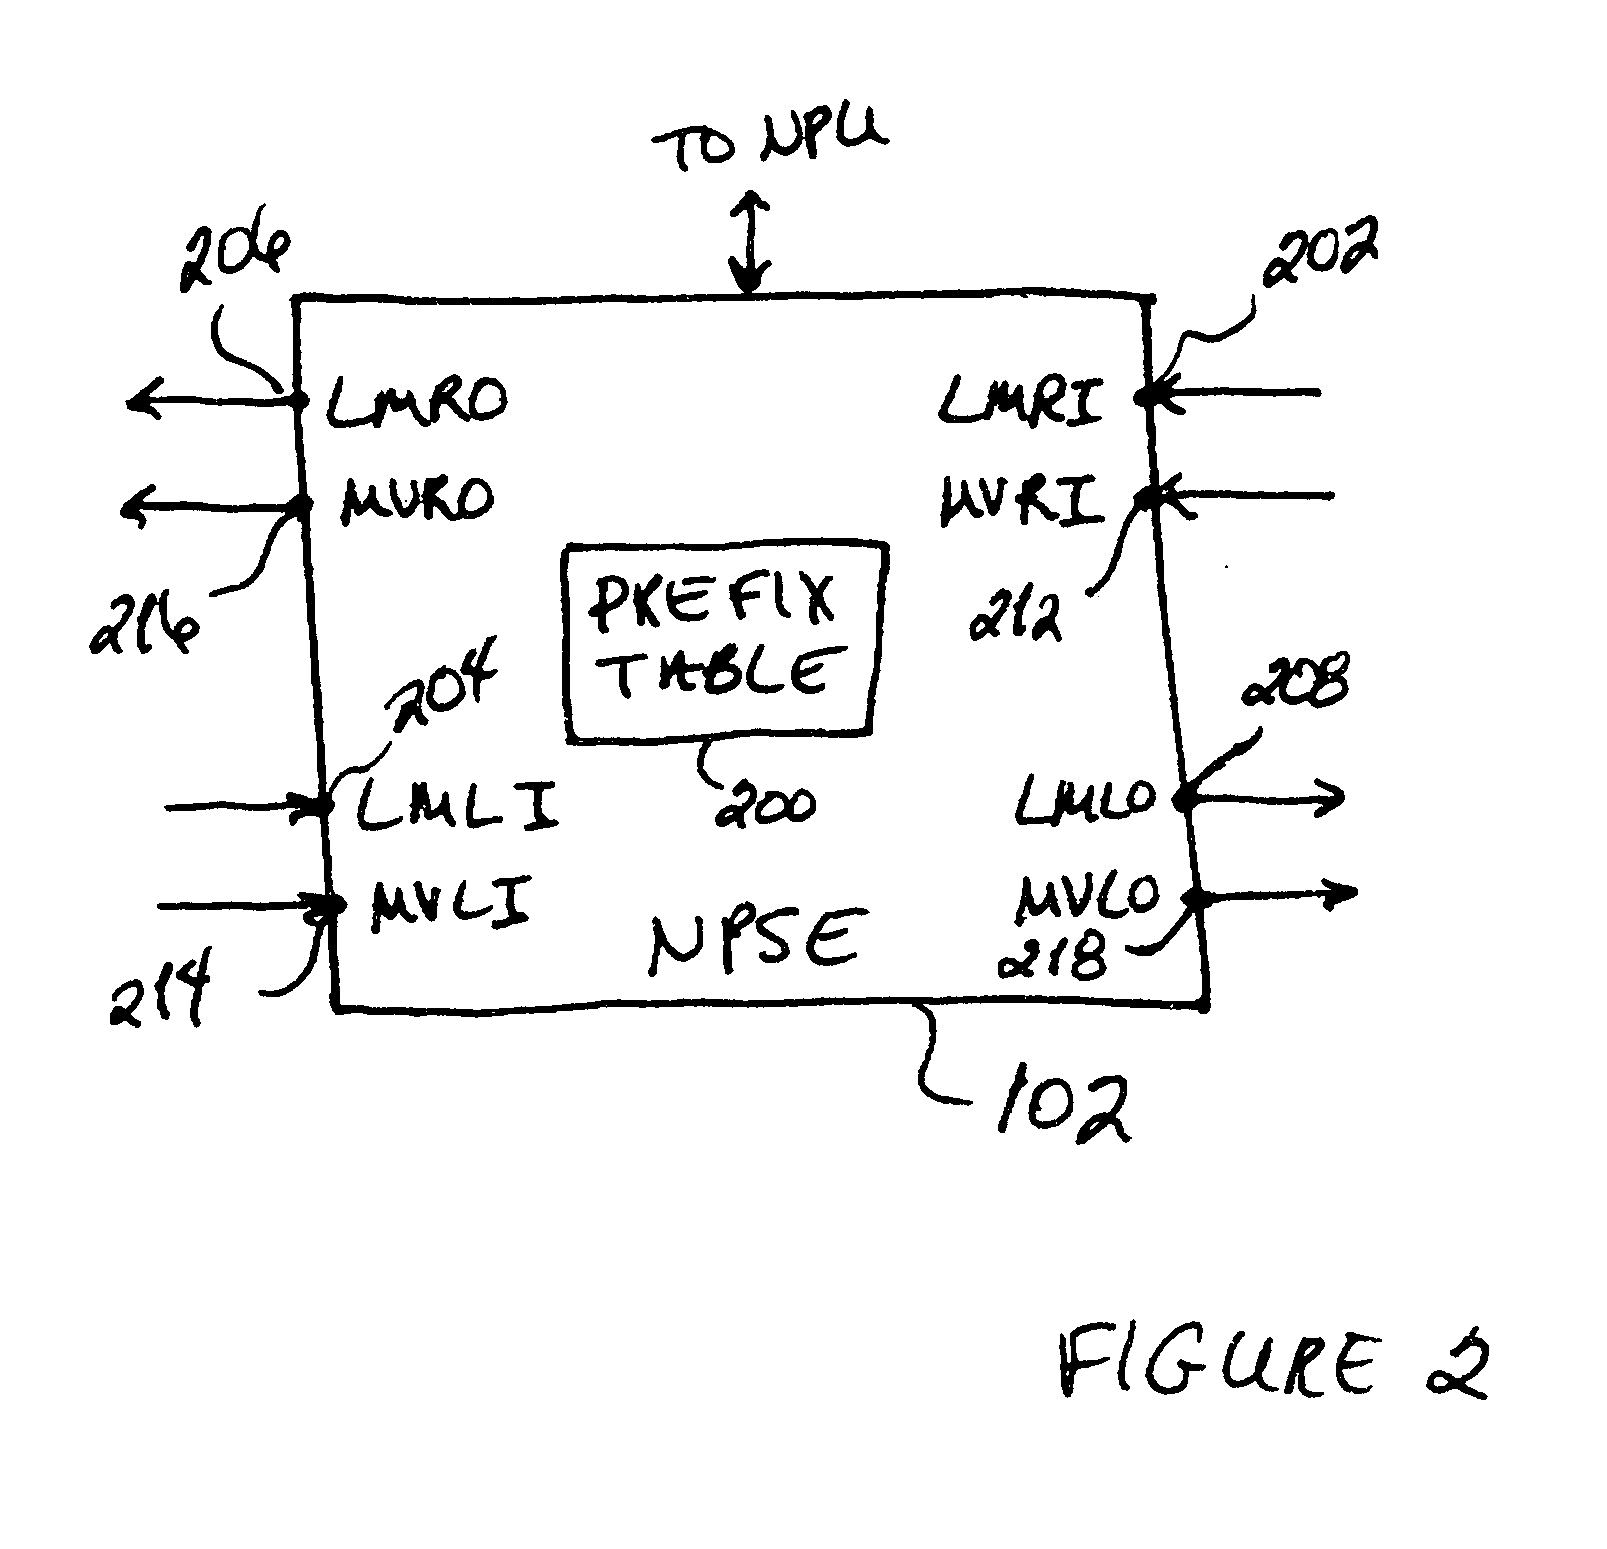 Method and system for providing cascaded trie-based network packet search engines